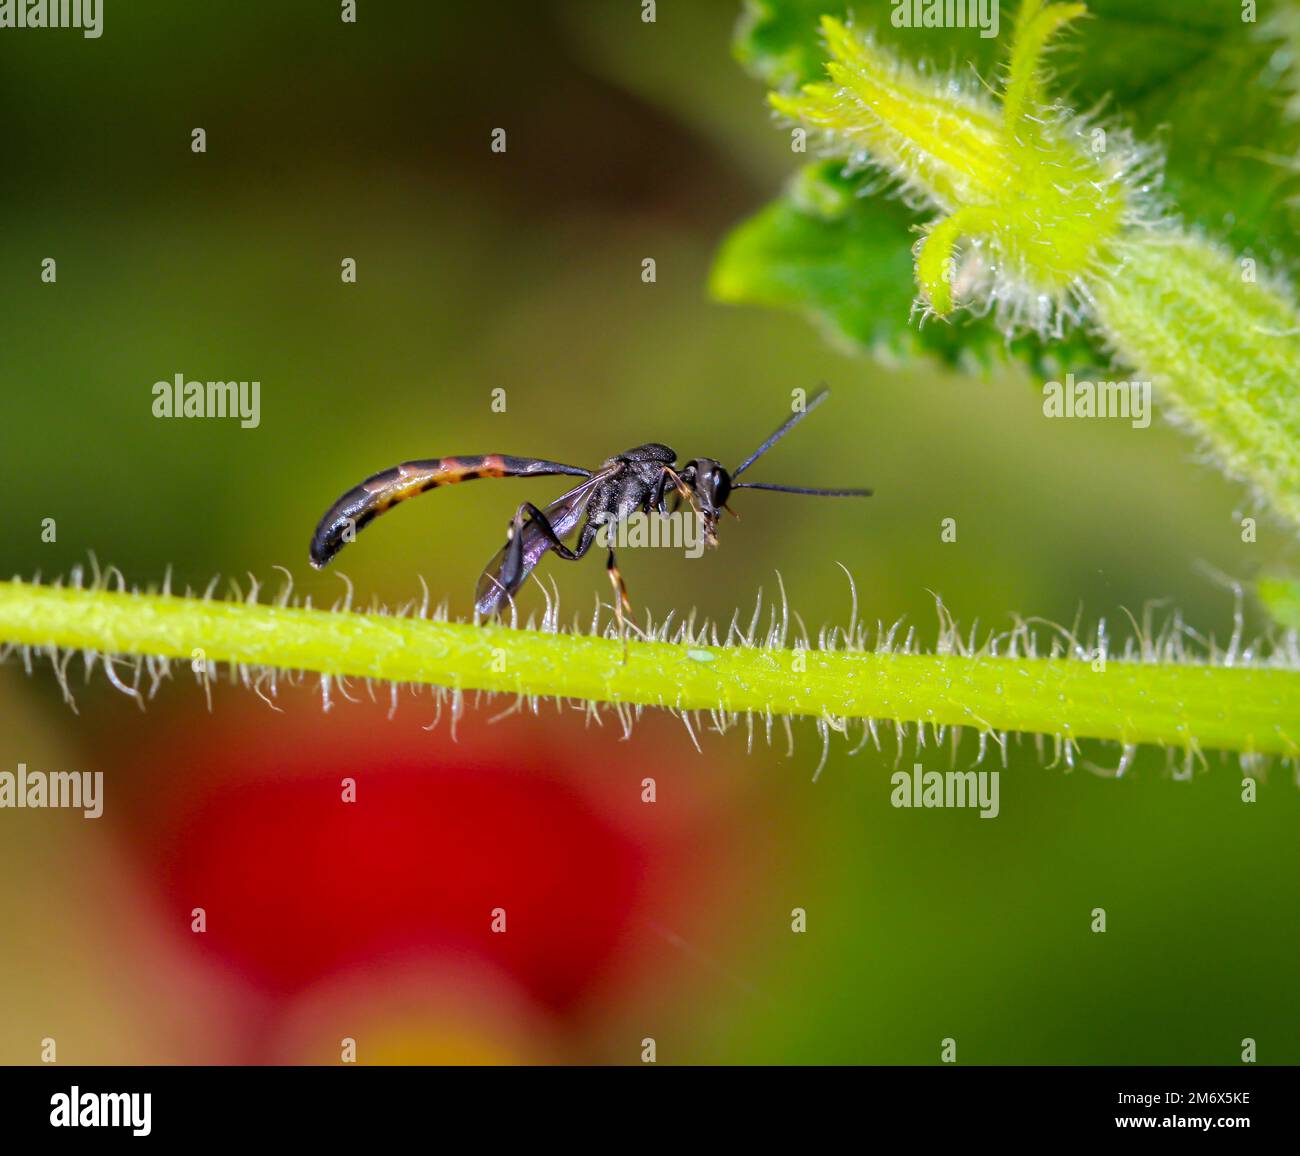 A Tailia wasp on a part of a cucumber plant. Stock Photo